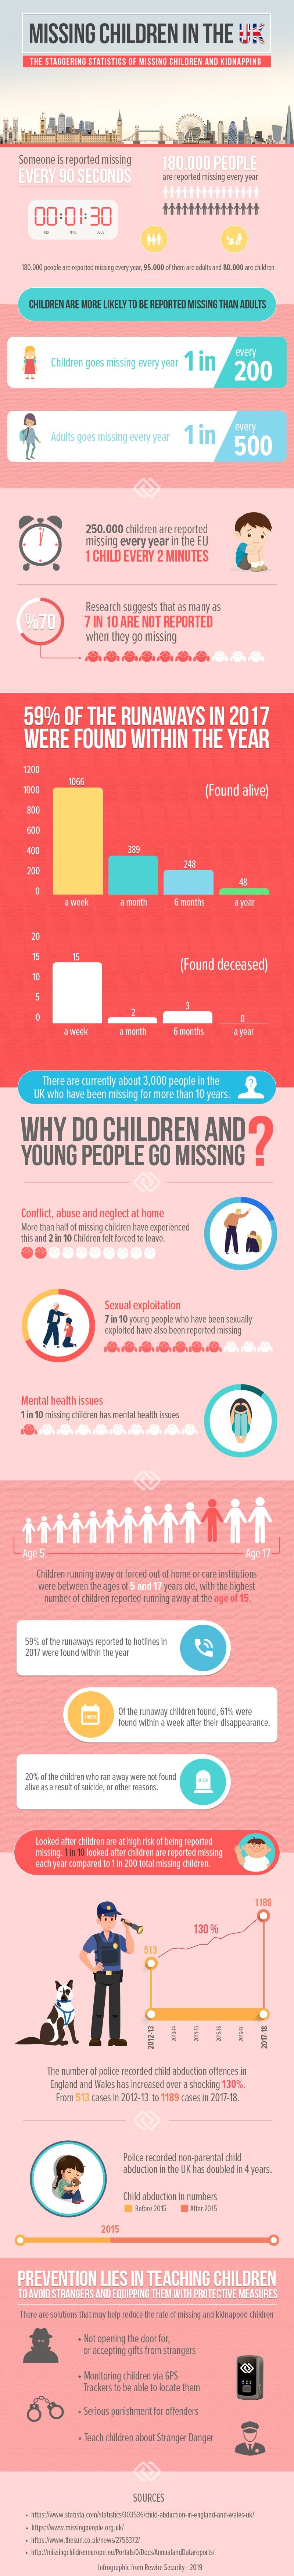 Missing Children In The Uk #infographic